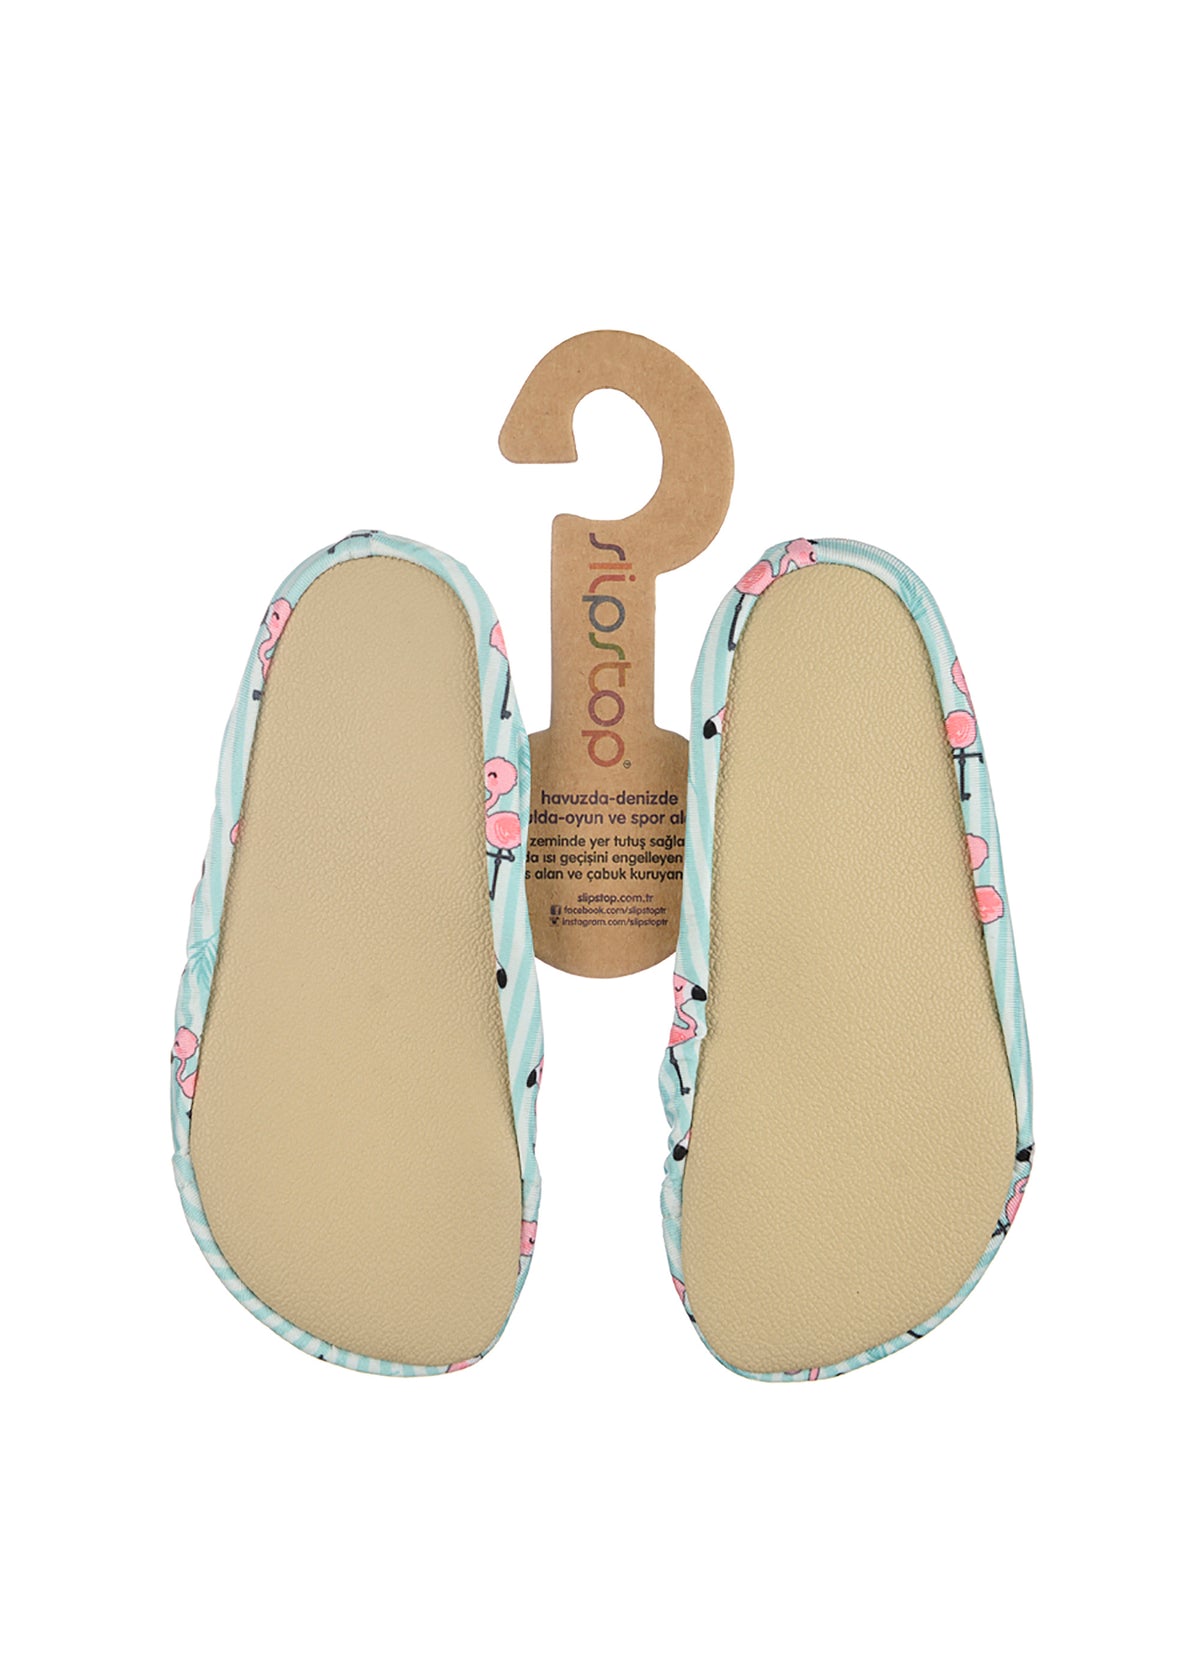 Children's slippers - Dilly, Flamingo